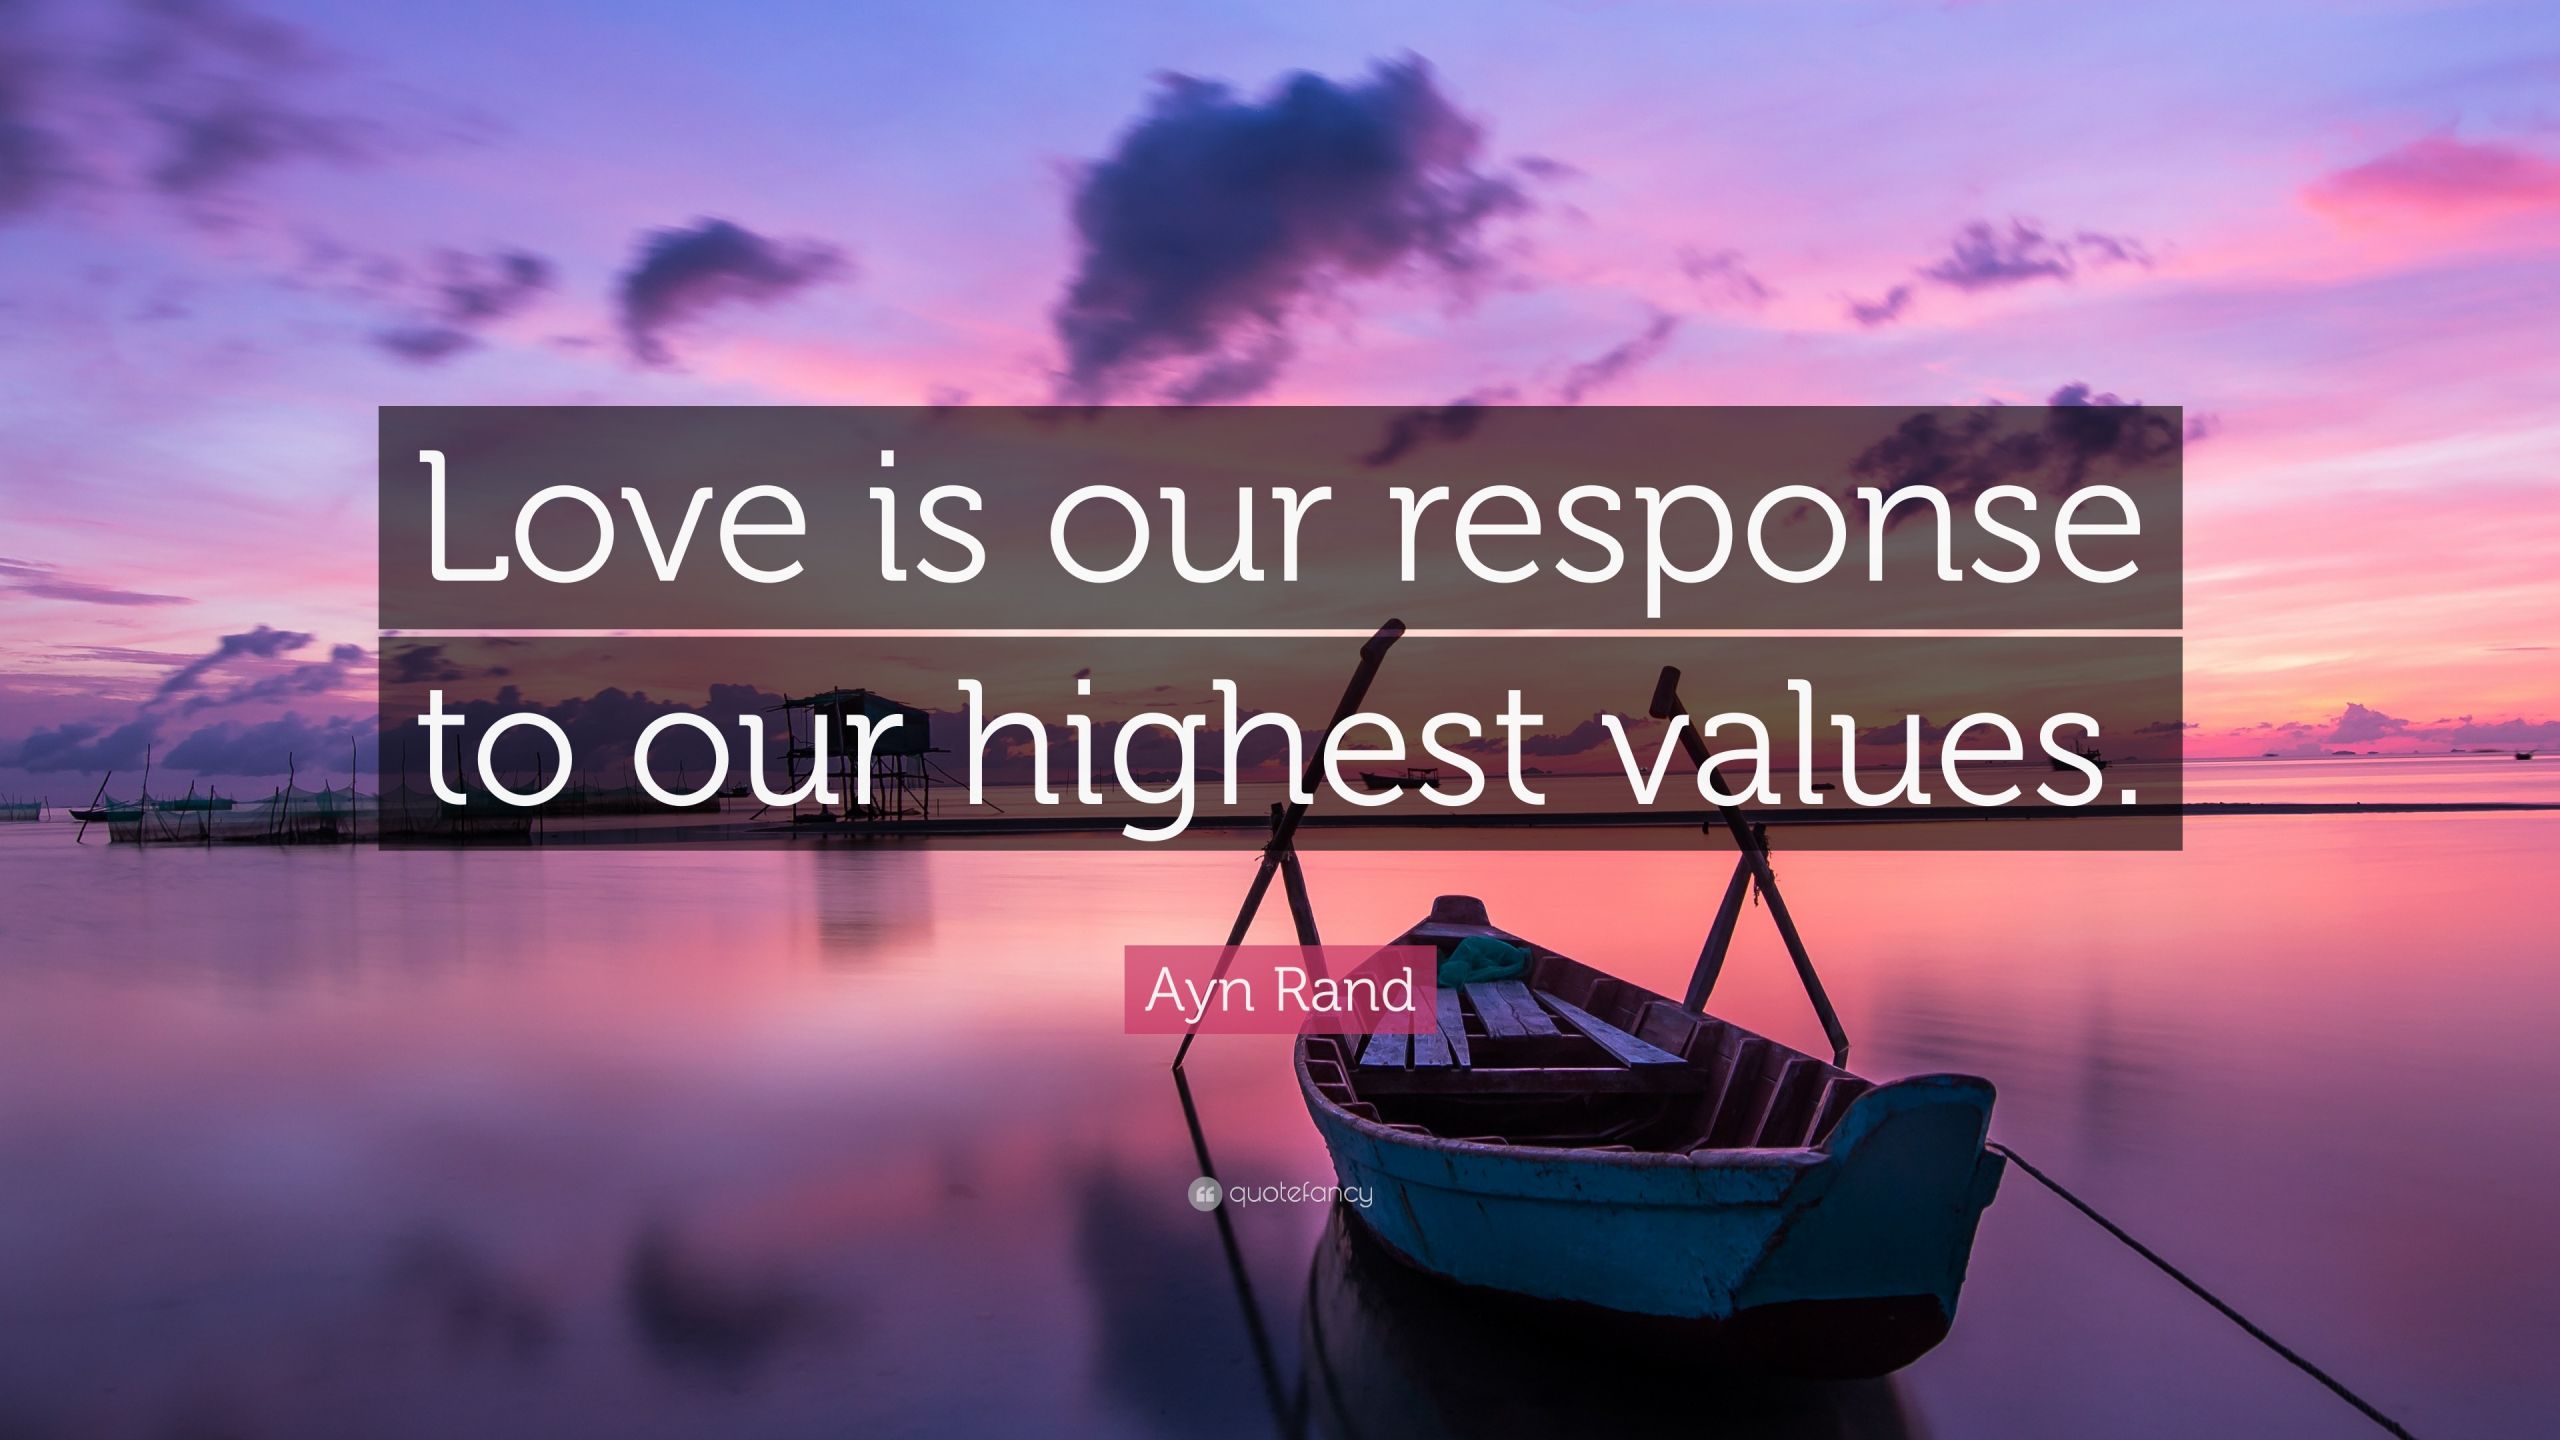 Ayn Rand Love Quotes
 Ayn Rand Quote “Love is our response to our highest